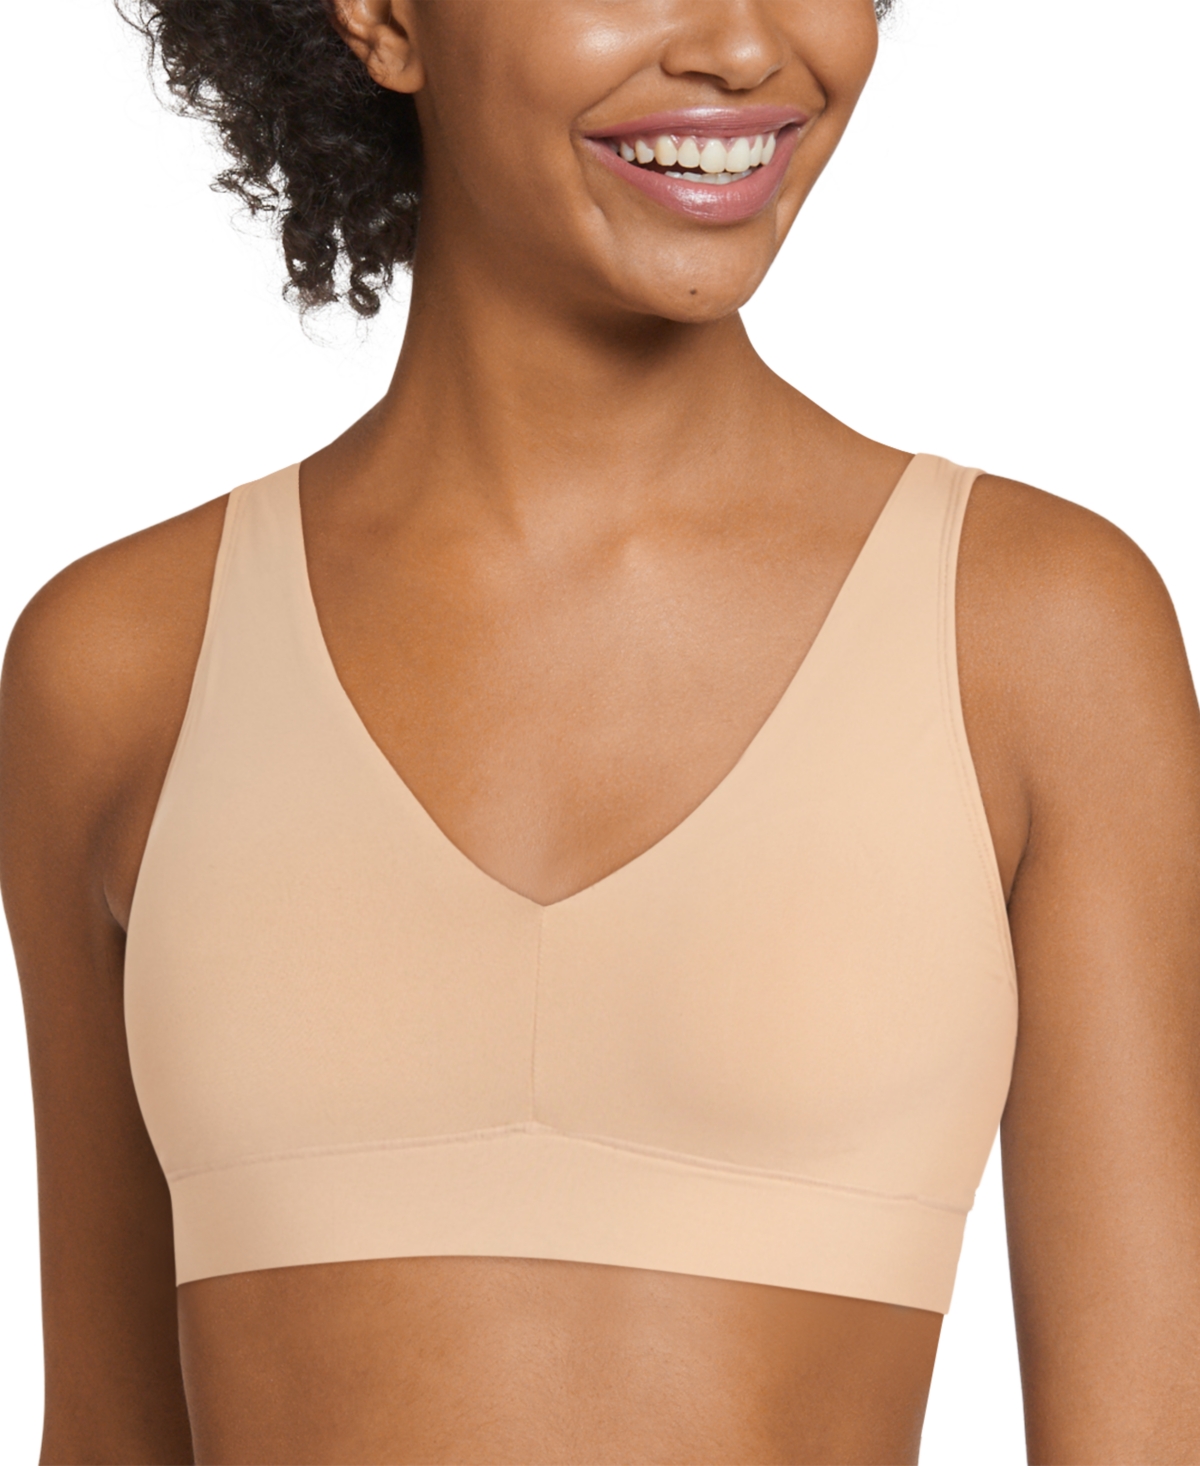 Women's Solid Seam-Free Smooth Light Support Bralette 3044 - White